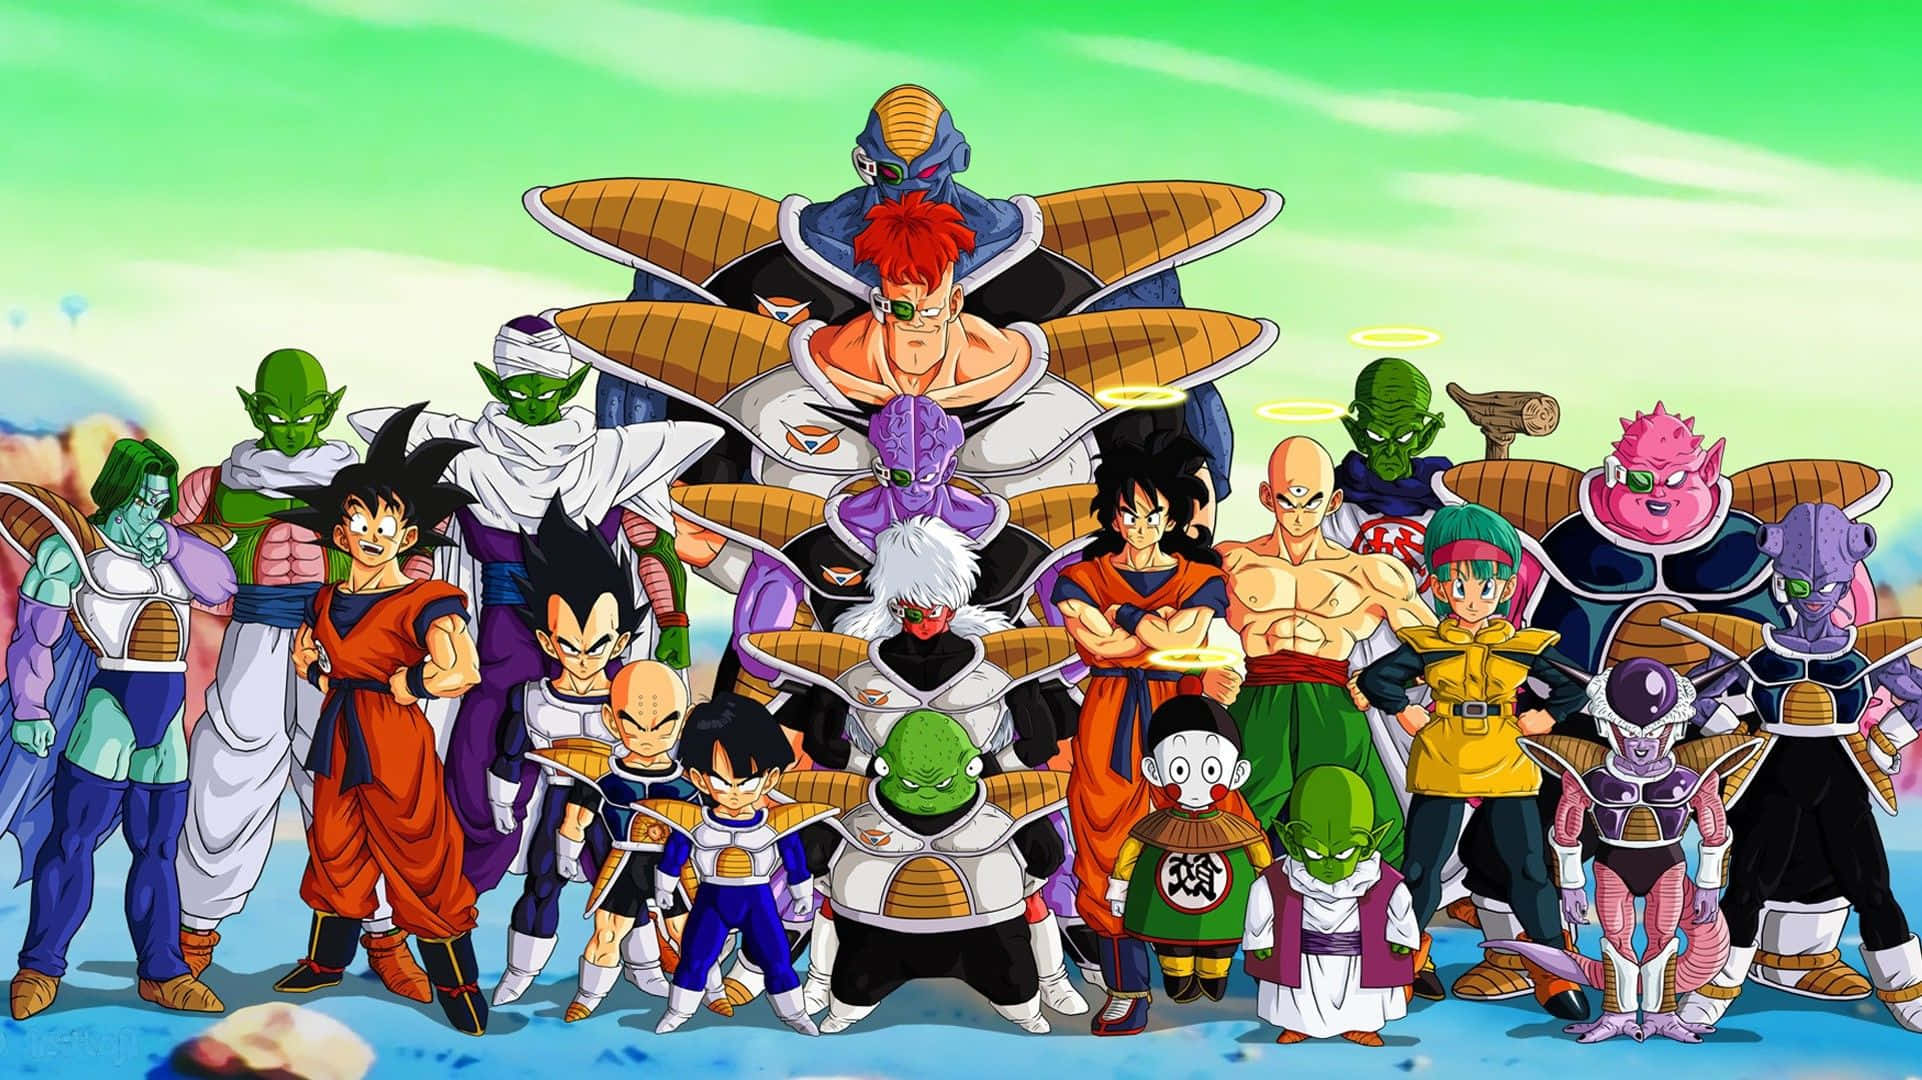 Captain Ginyu leading the powerful Ginyu Force lineup Wallpaper